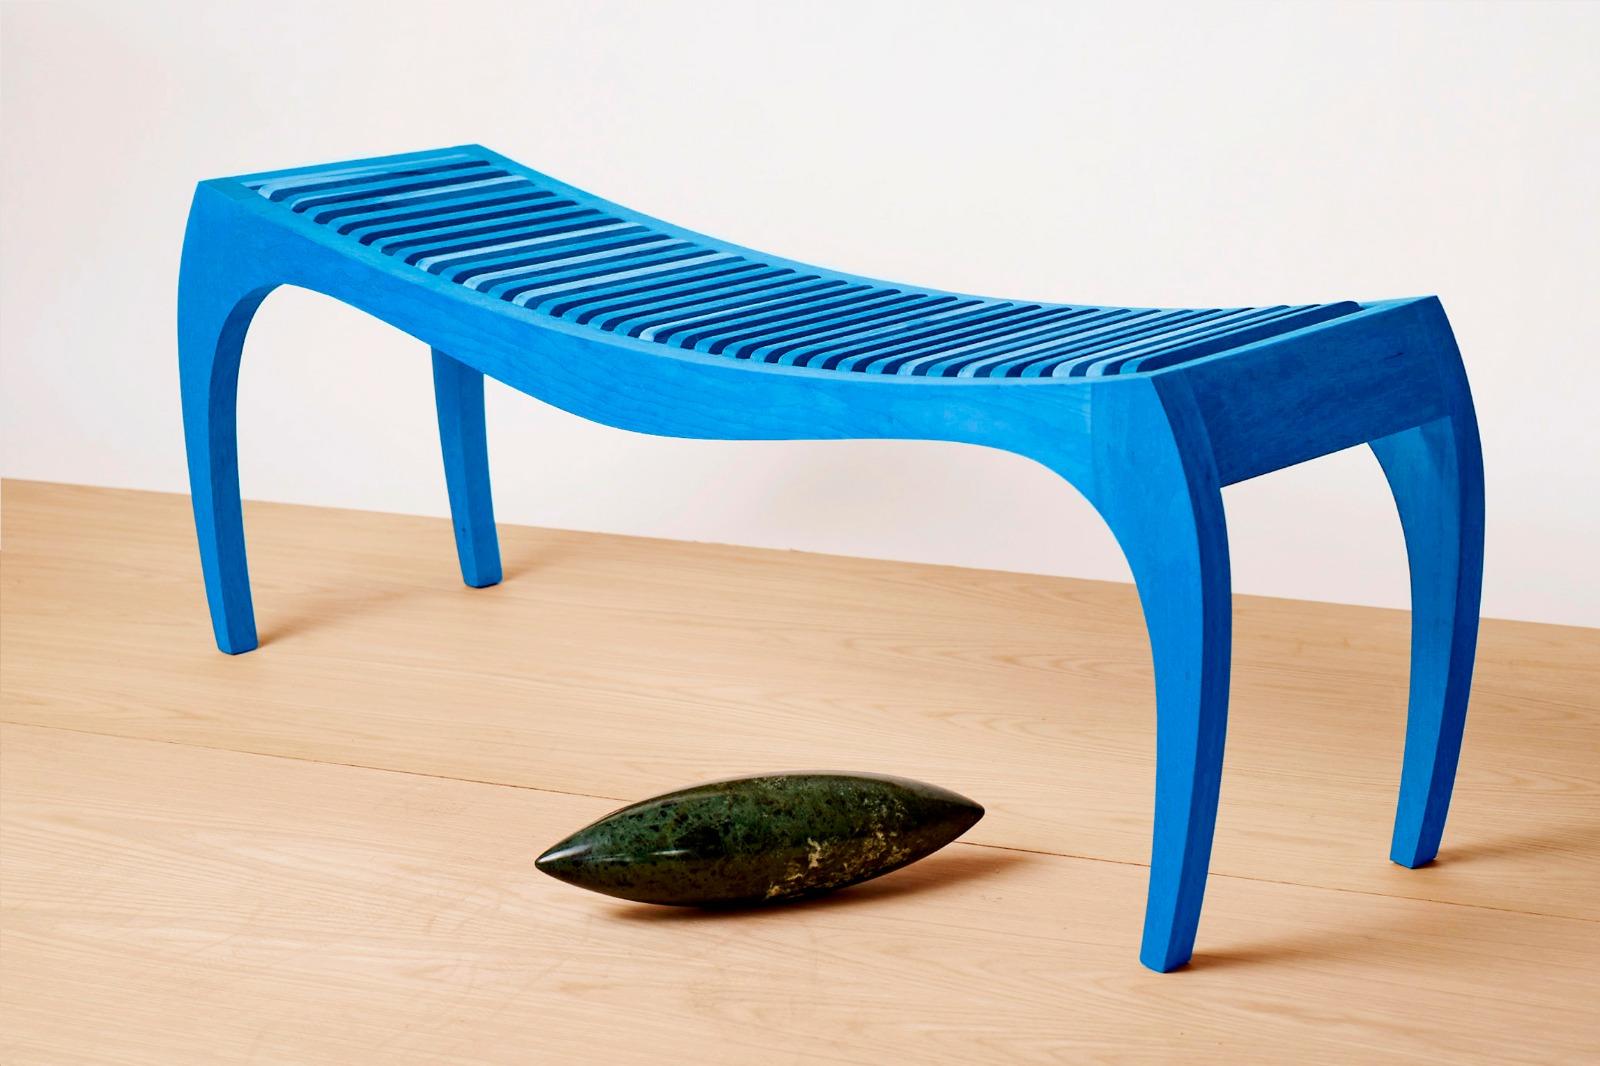 Blue bench rumbo by Jean-Baptiste Van den Heede
Unique piece signed and numbered
Dimensions: L 118 x H 42 x W 31 cm 
Materials: solid wood

Jean-Baptiste Van den Heede defines himself as a cabinetmaker-designer and an artist of academic